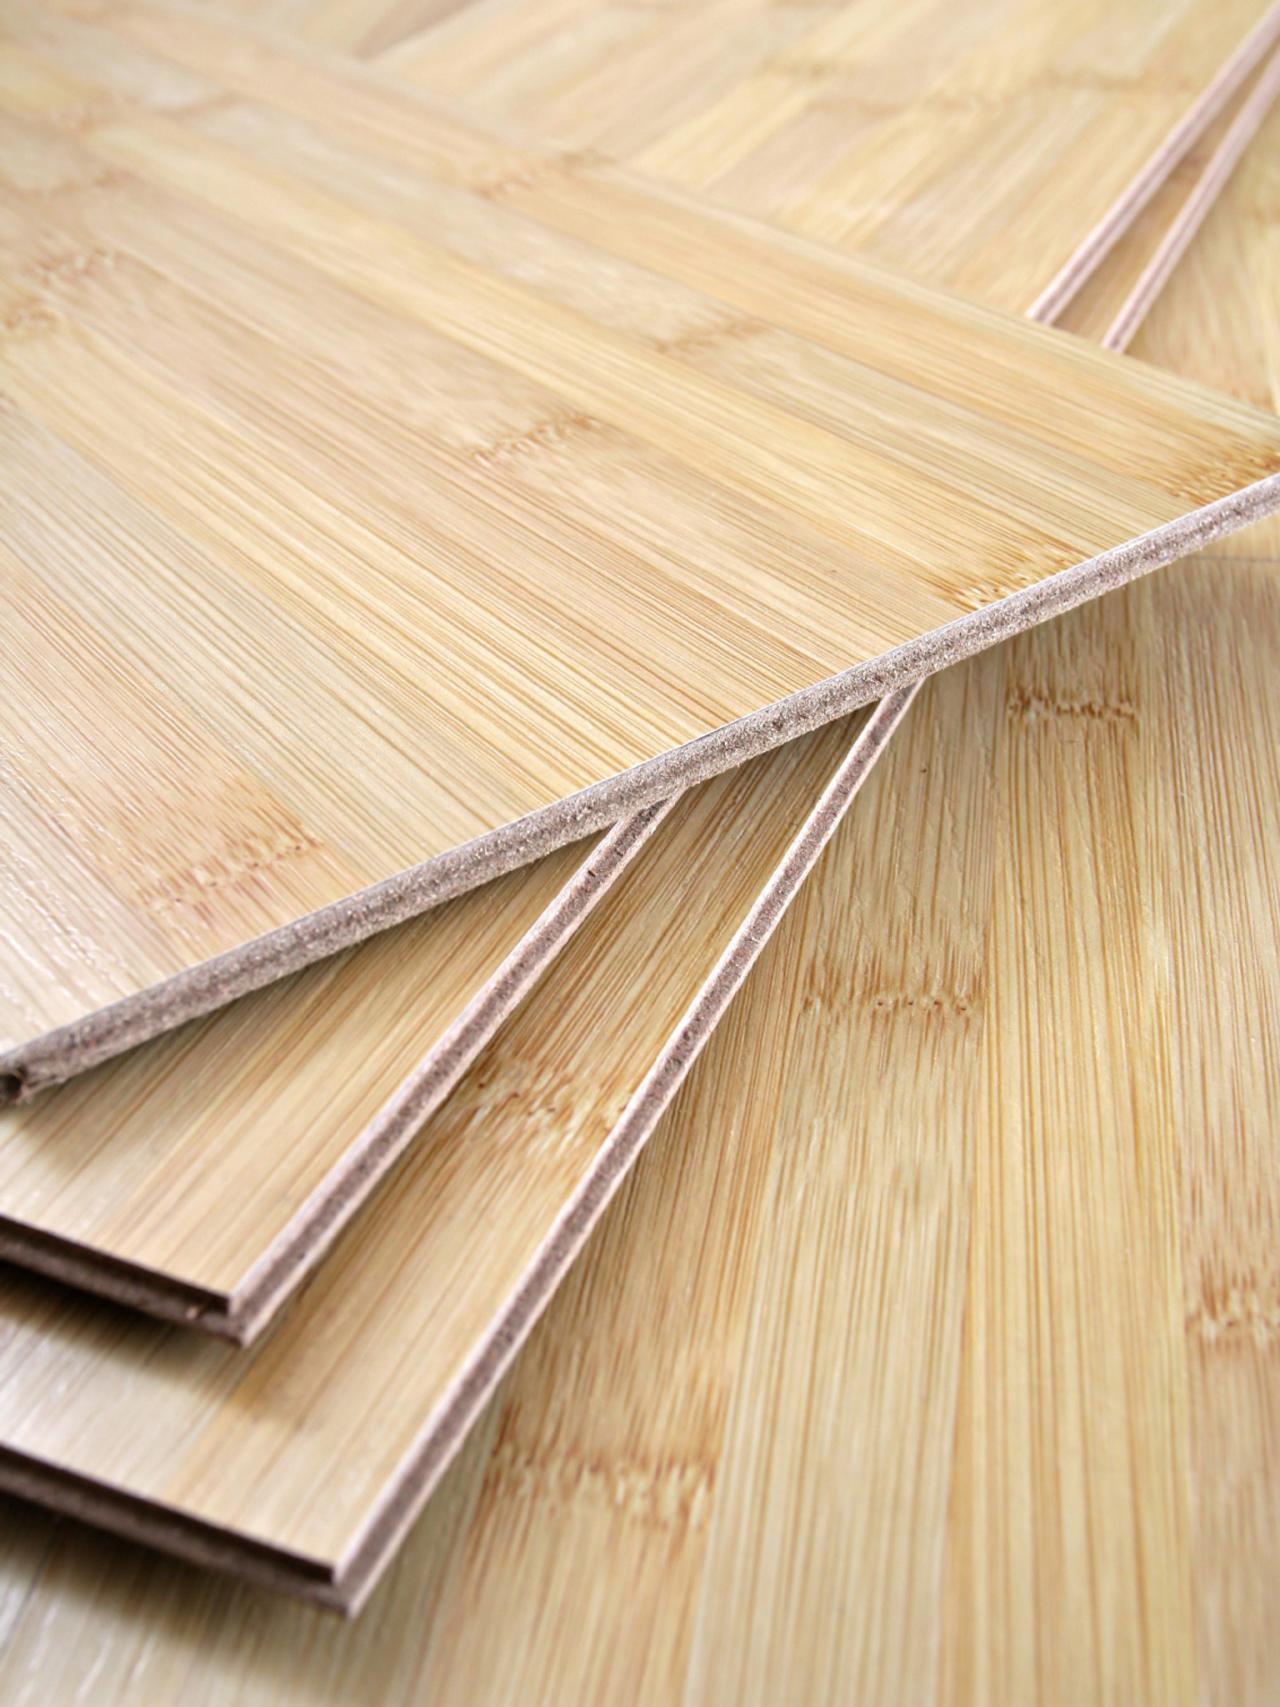 Cost Of Bamboo Floor Vs Engineered Hardwood, What Are The Advantages And Disadvantages Of Bamboo Flooring